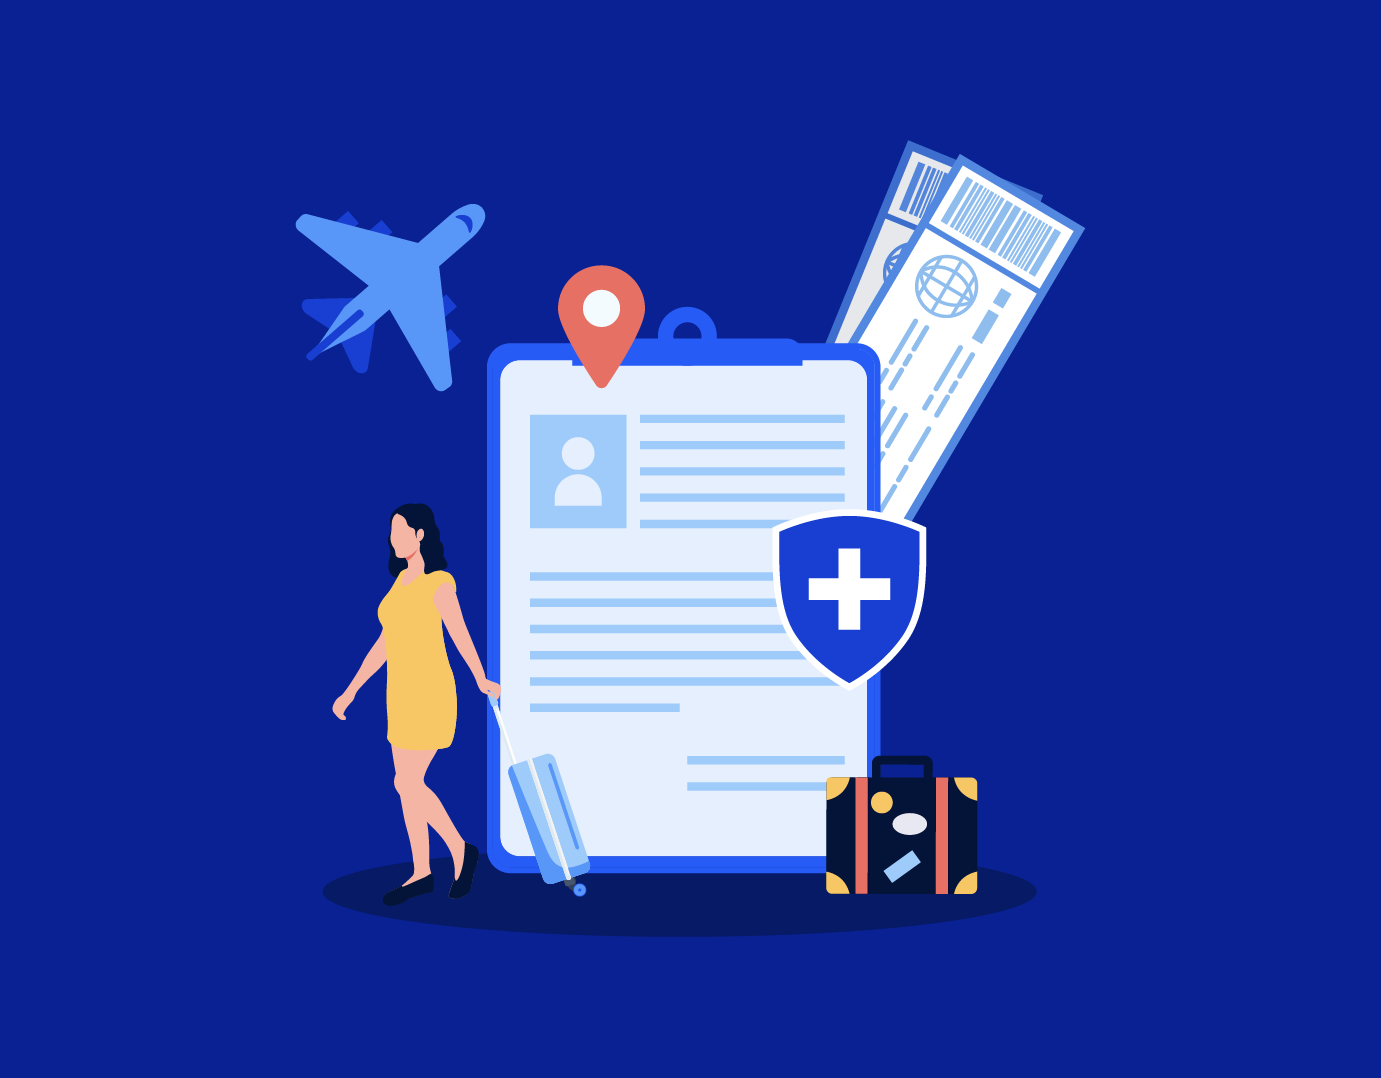 Things to Consider Before Buying Travel Insurance